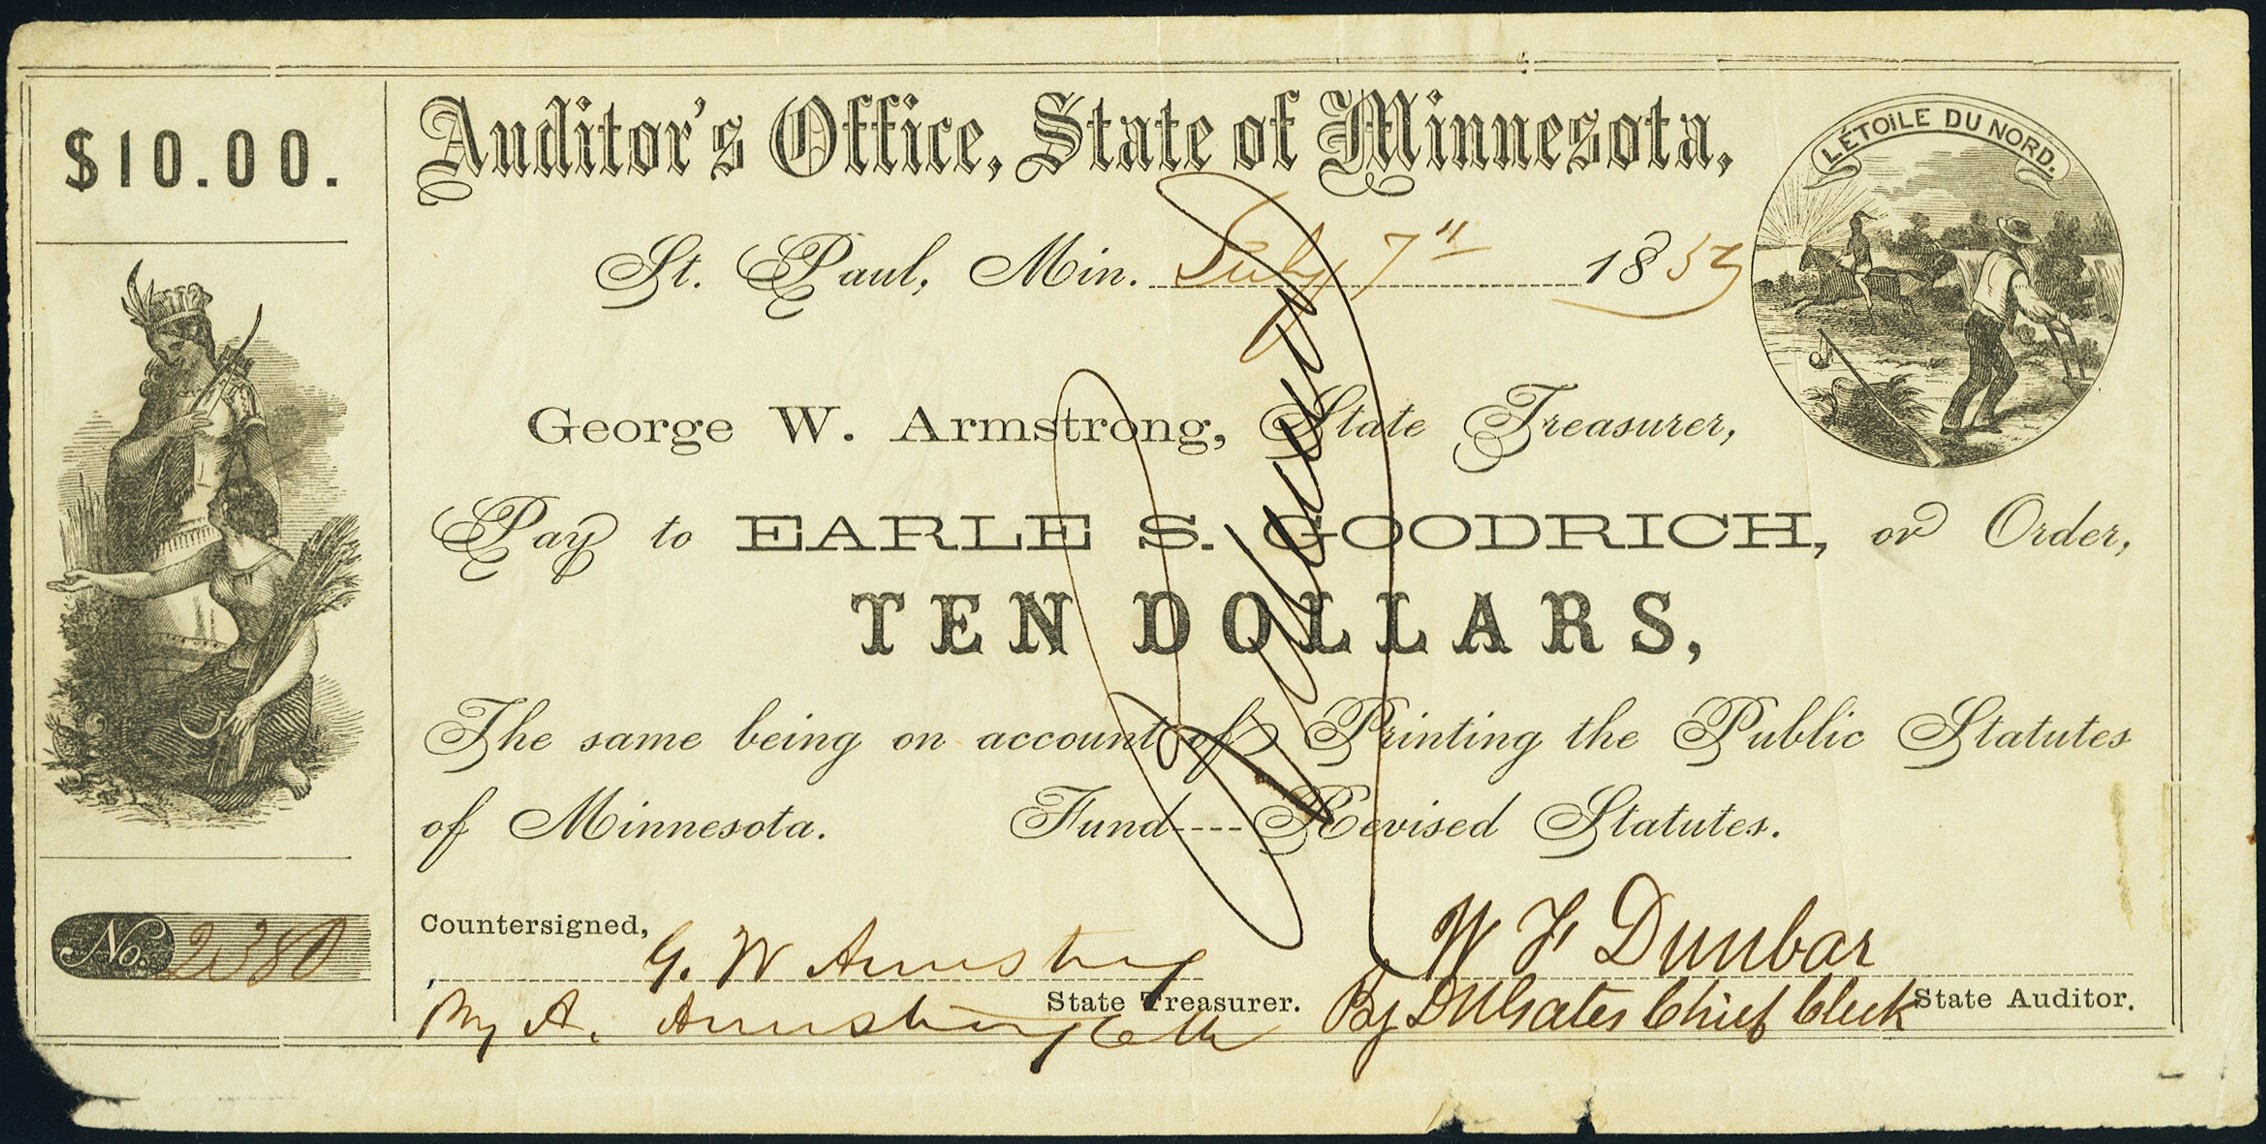 $10 Auditor's Office - State of Minnesota